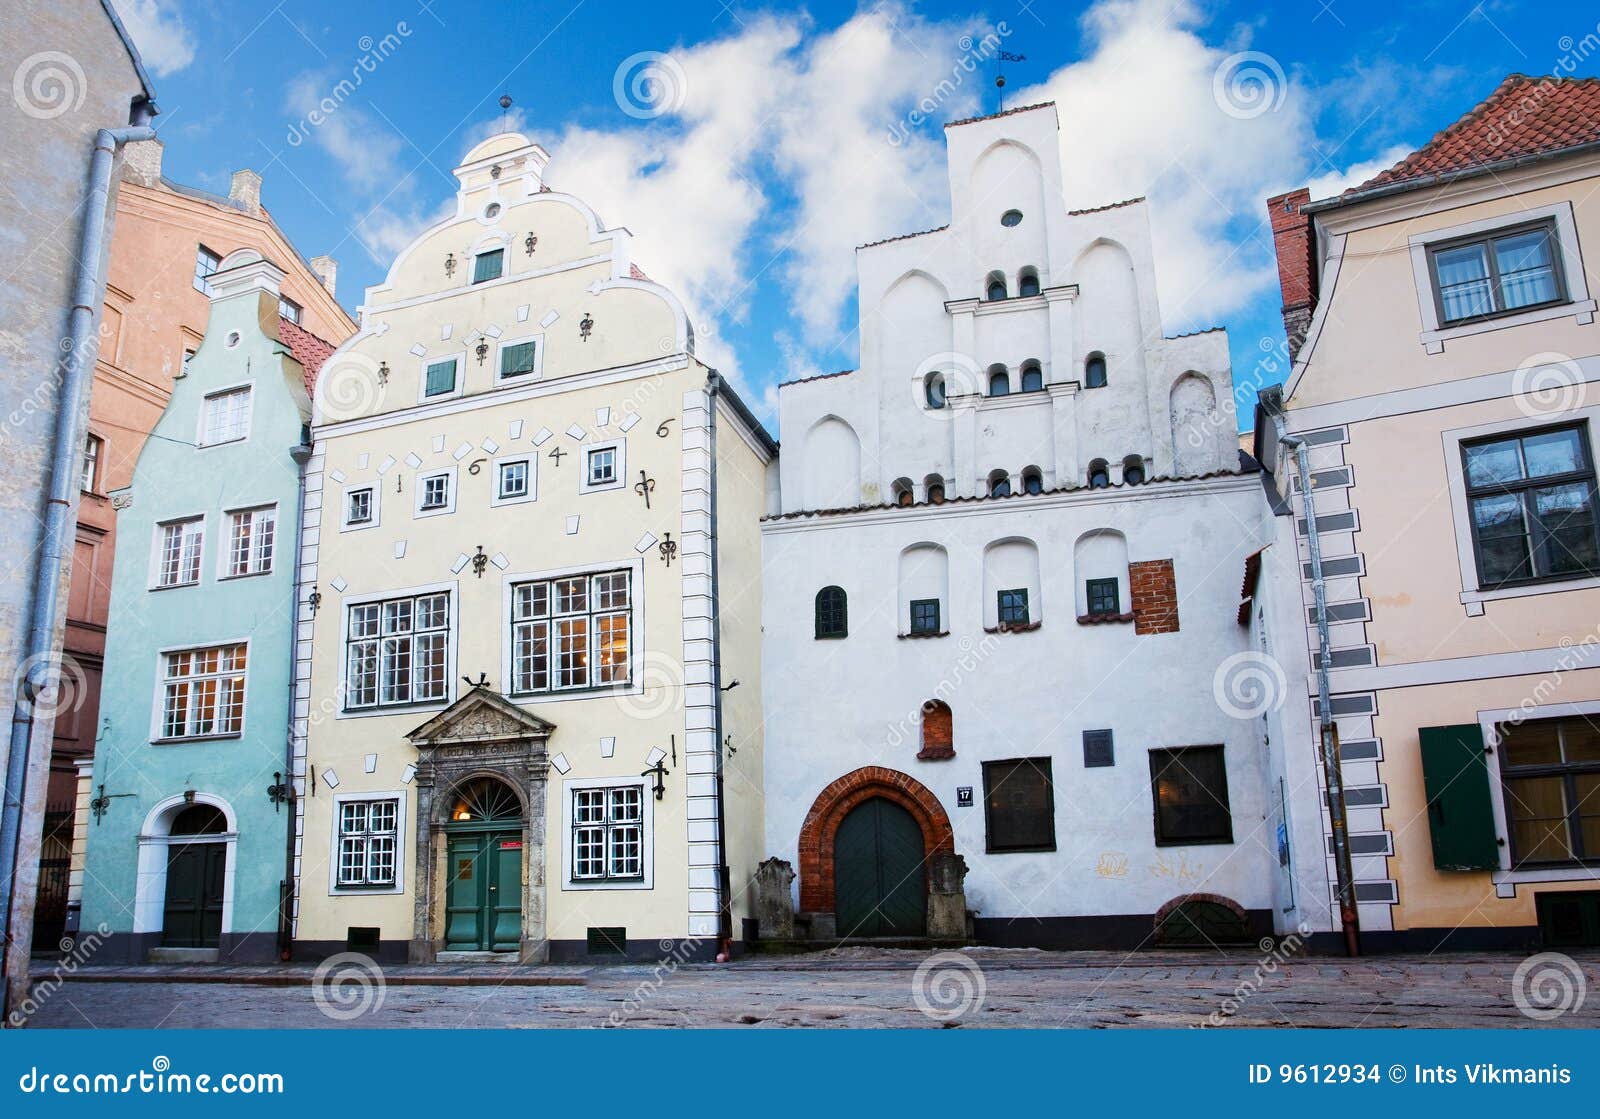 houses in old town, riga